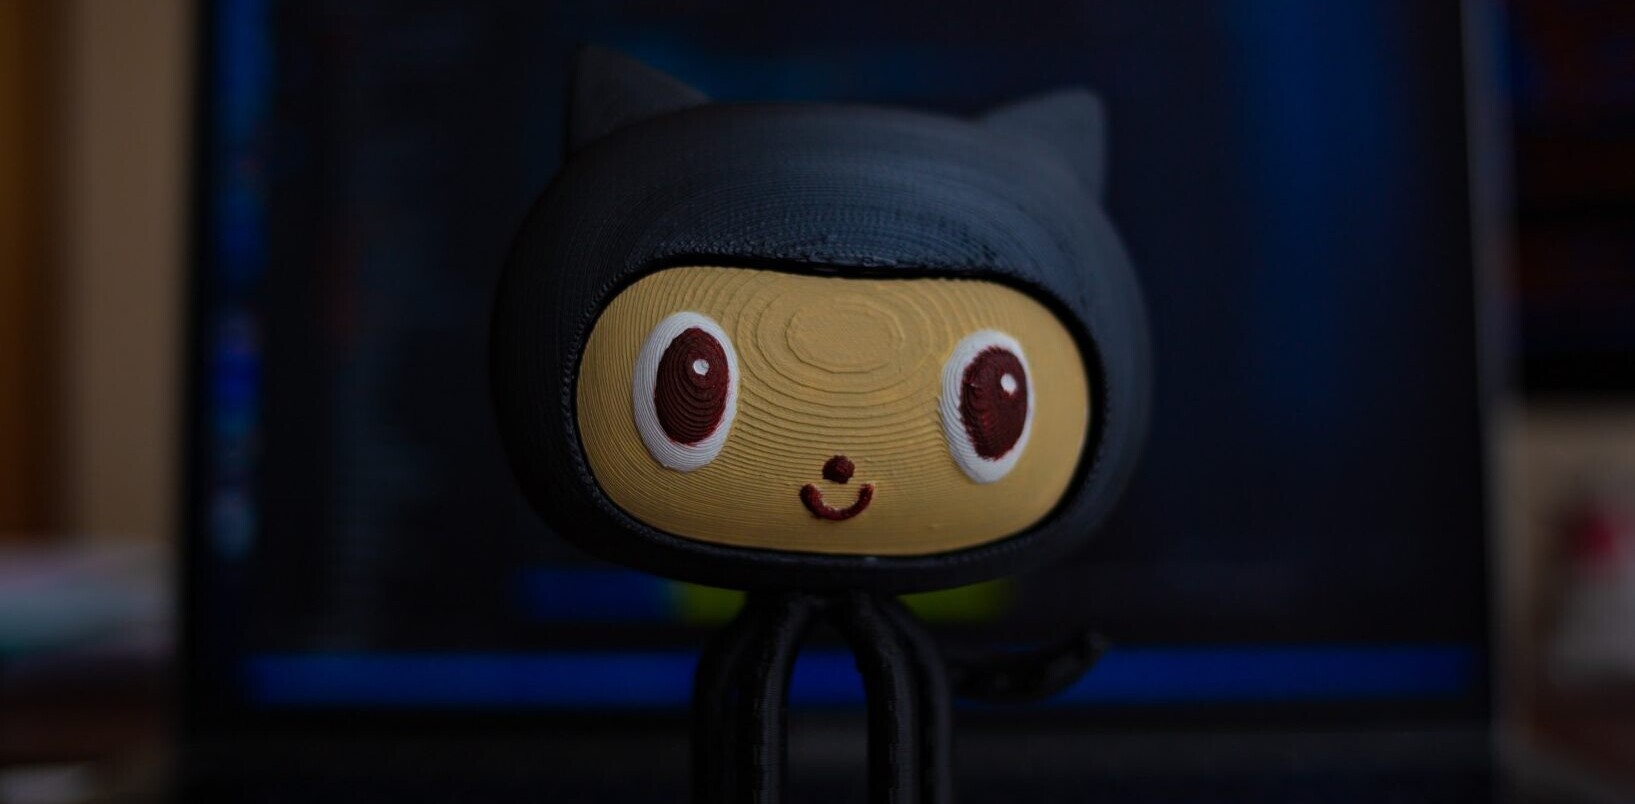 GitHub is making 2FA mandatory for devs — here’s how to enable it